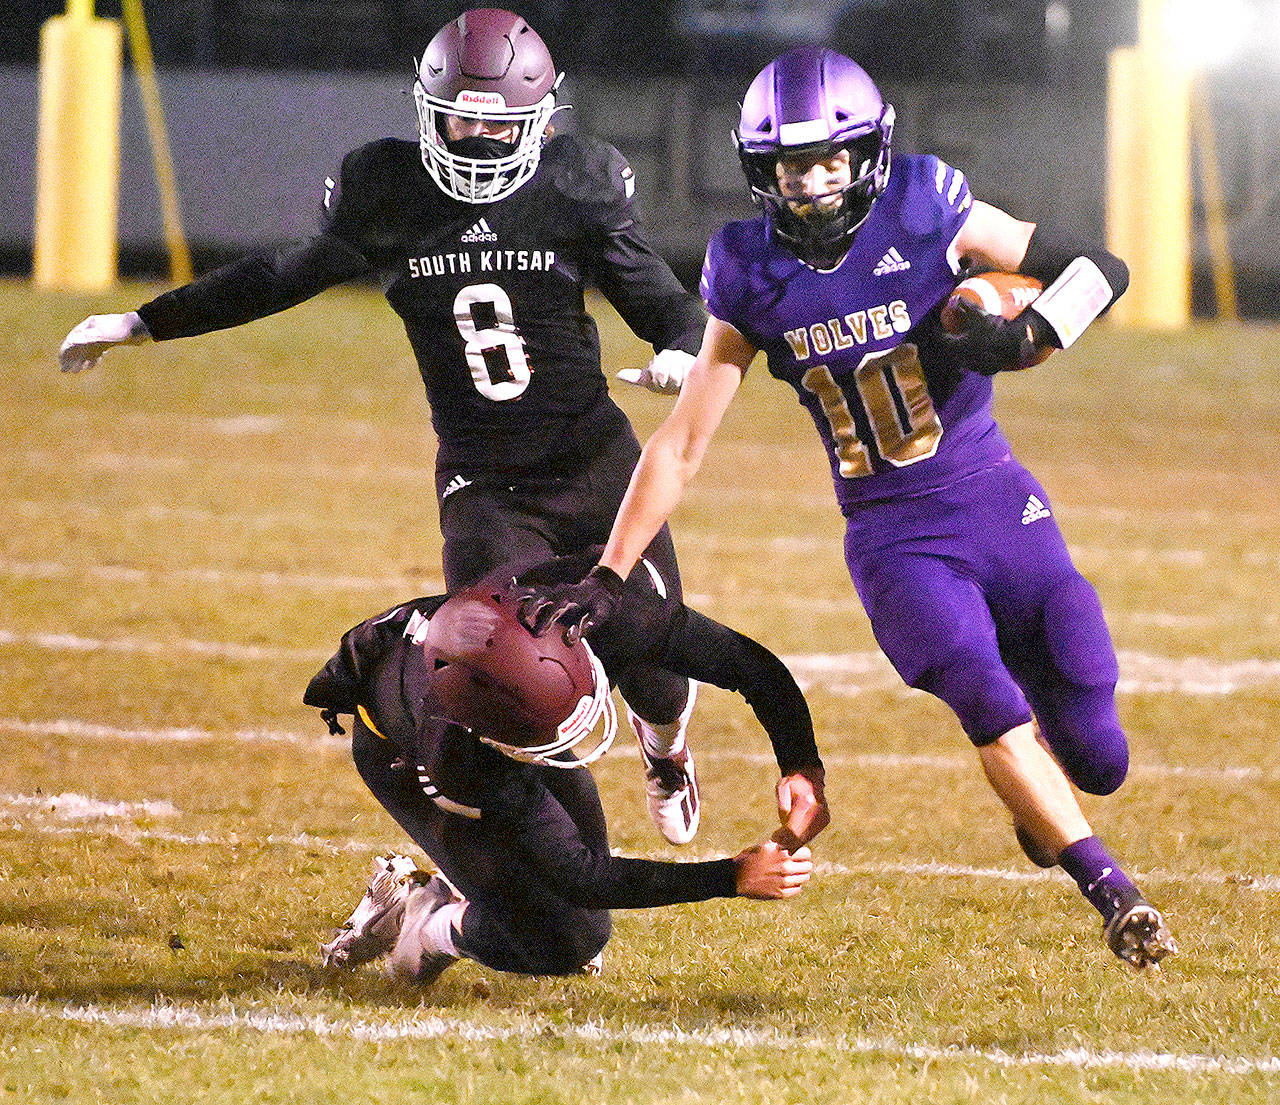 Sequim senior Garrett Hoesel, right, picks up 54 yards on a punt return in the first half of Sequim’s 27-15 home win over South Kitsap on Friday. Michael Dashiell/Olympic Peninsula News Group